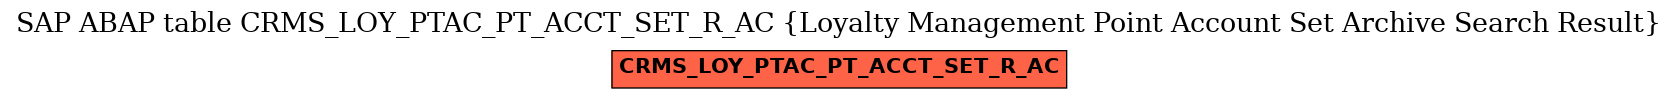 E-R Diagram for table CRMS_LOY_PTAC_PT_ACCT_SET_R_AC (Loyalty Management Point Account Set Archive Search Result)